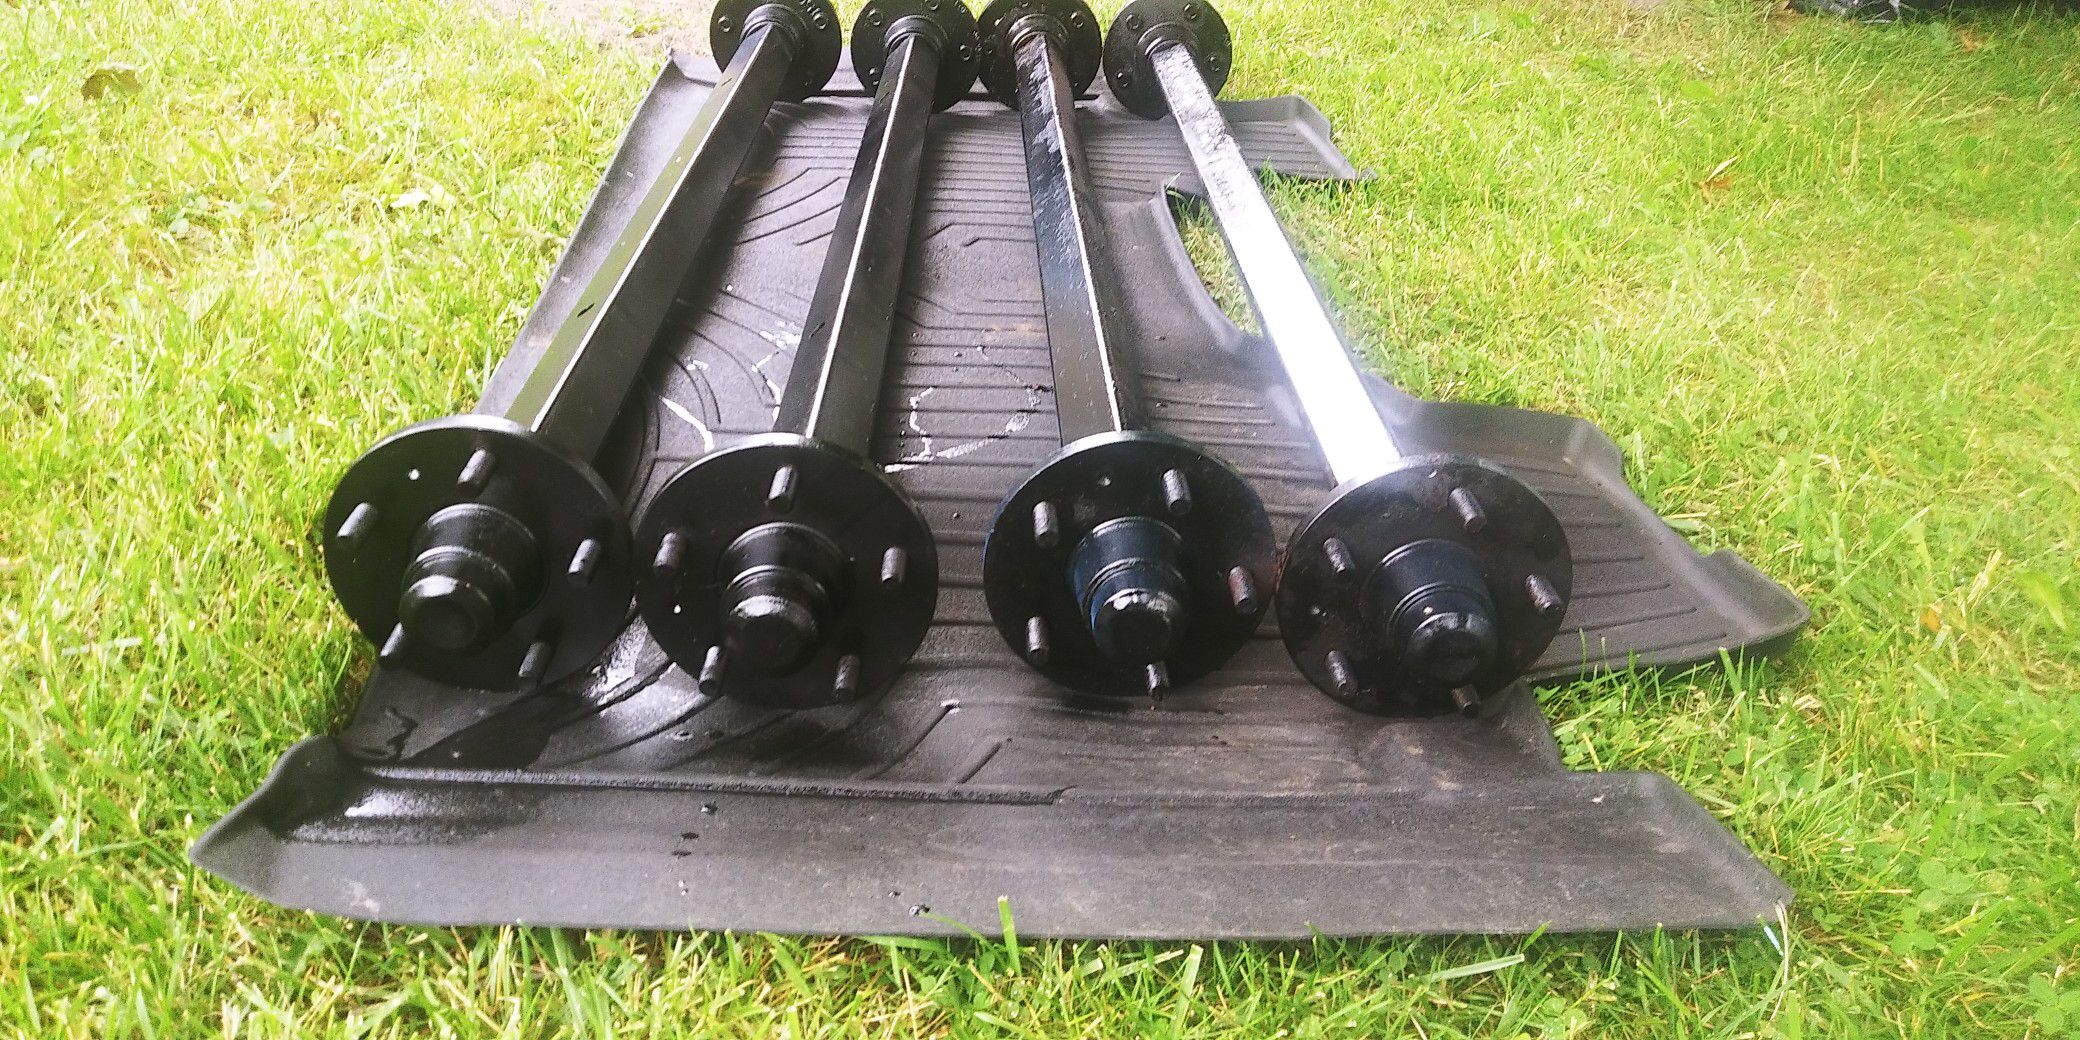 Axles for a small trailer build your own.